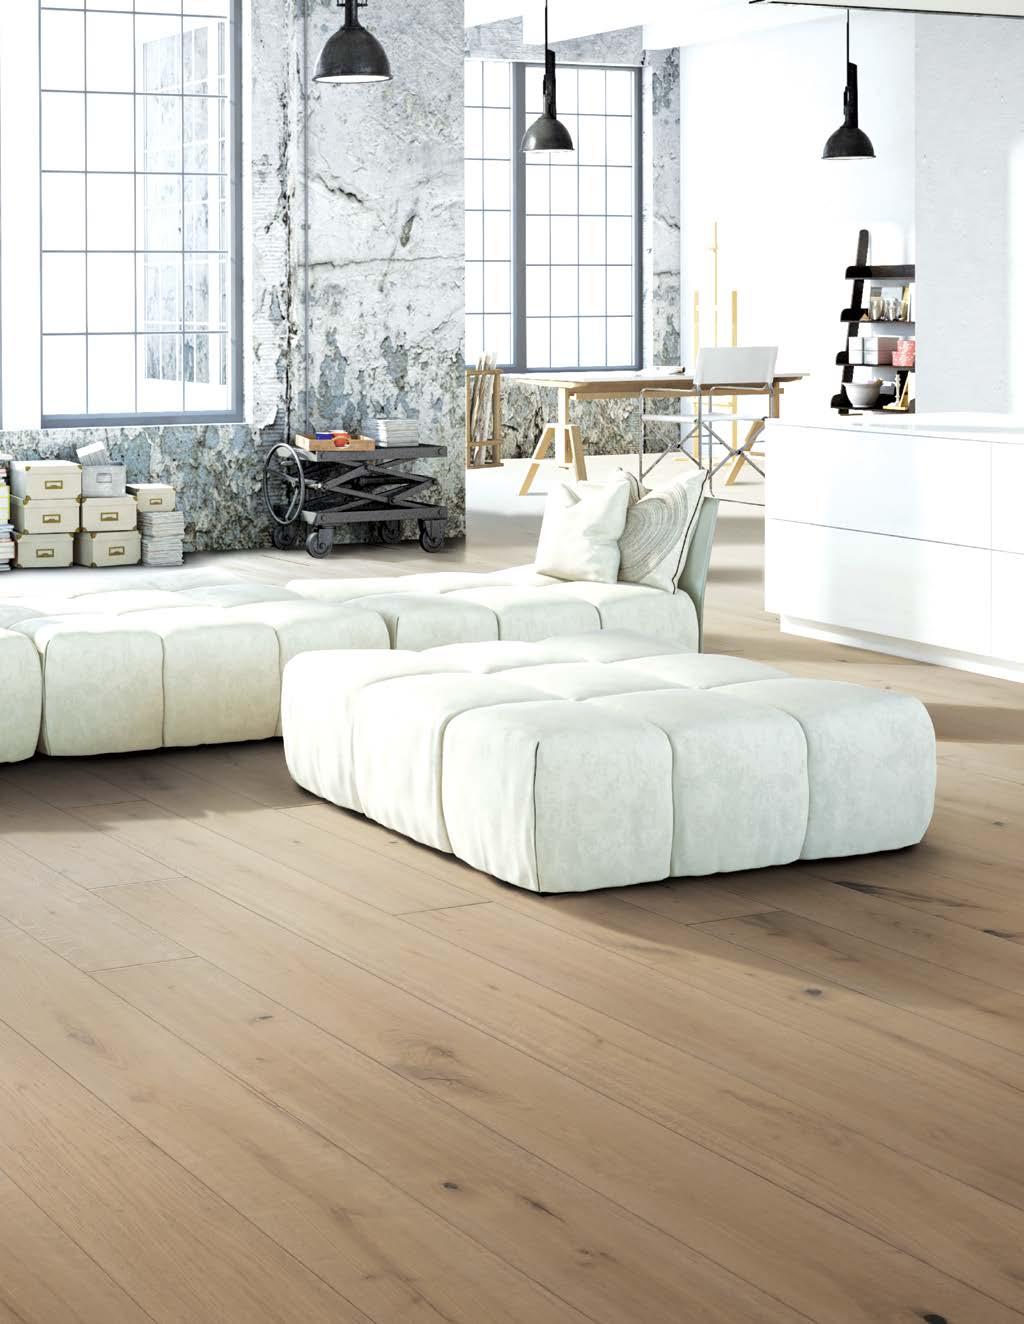 Naturally distressed planks are rich in character by highlighting accented knots and hand-hewn textures.